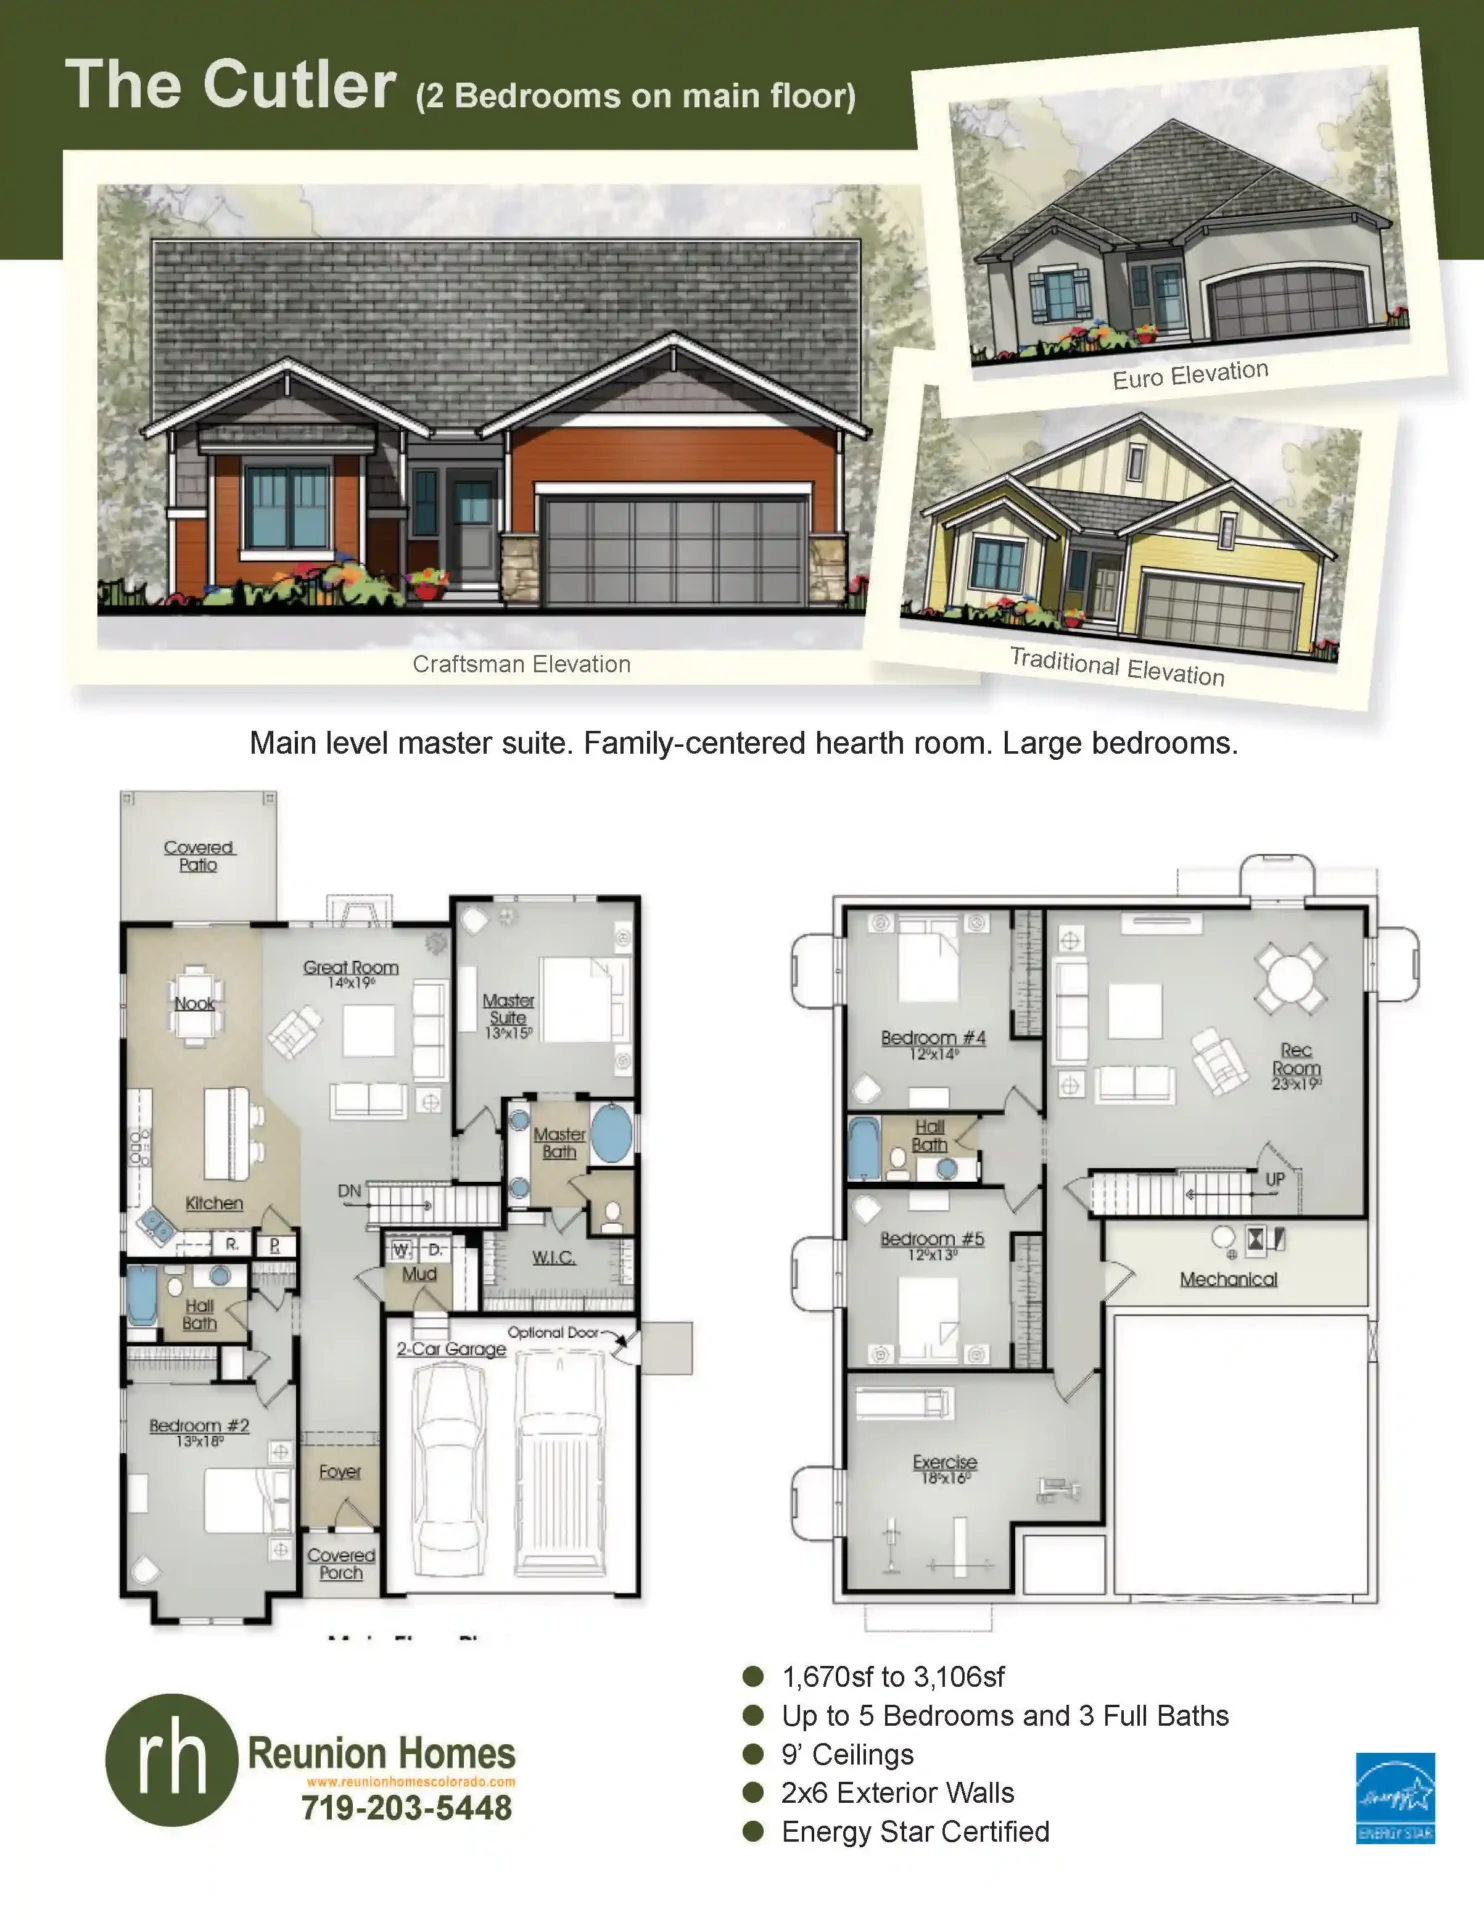 cutler2bed-home-plan-new